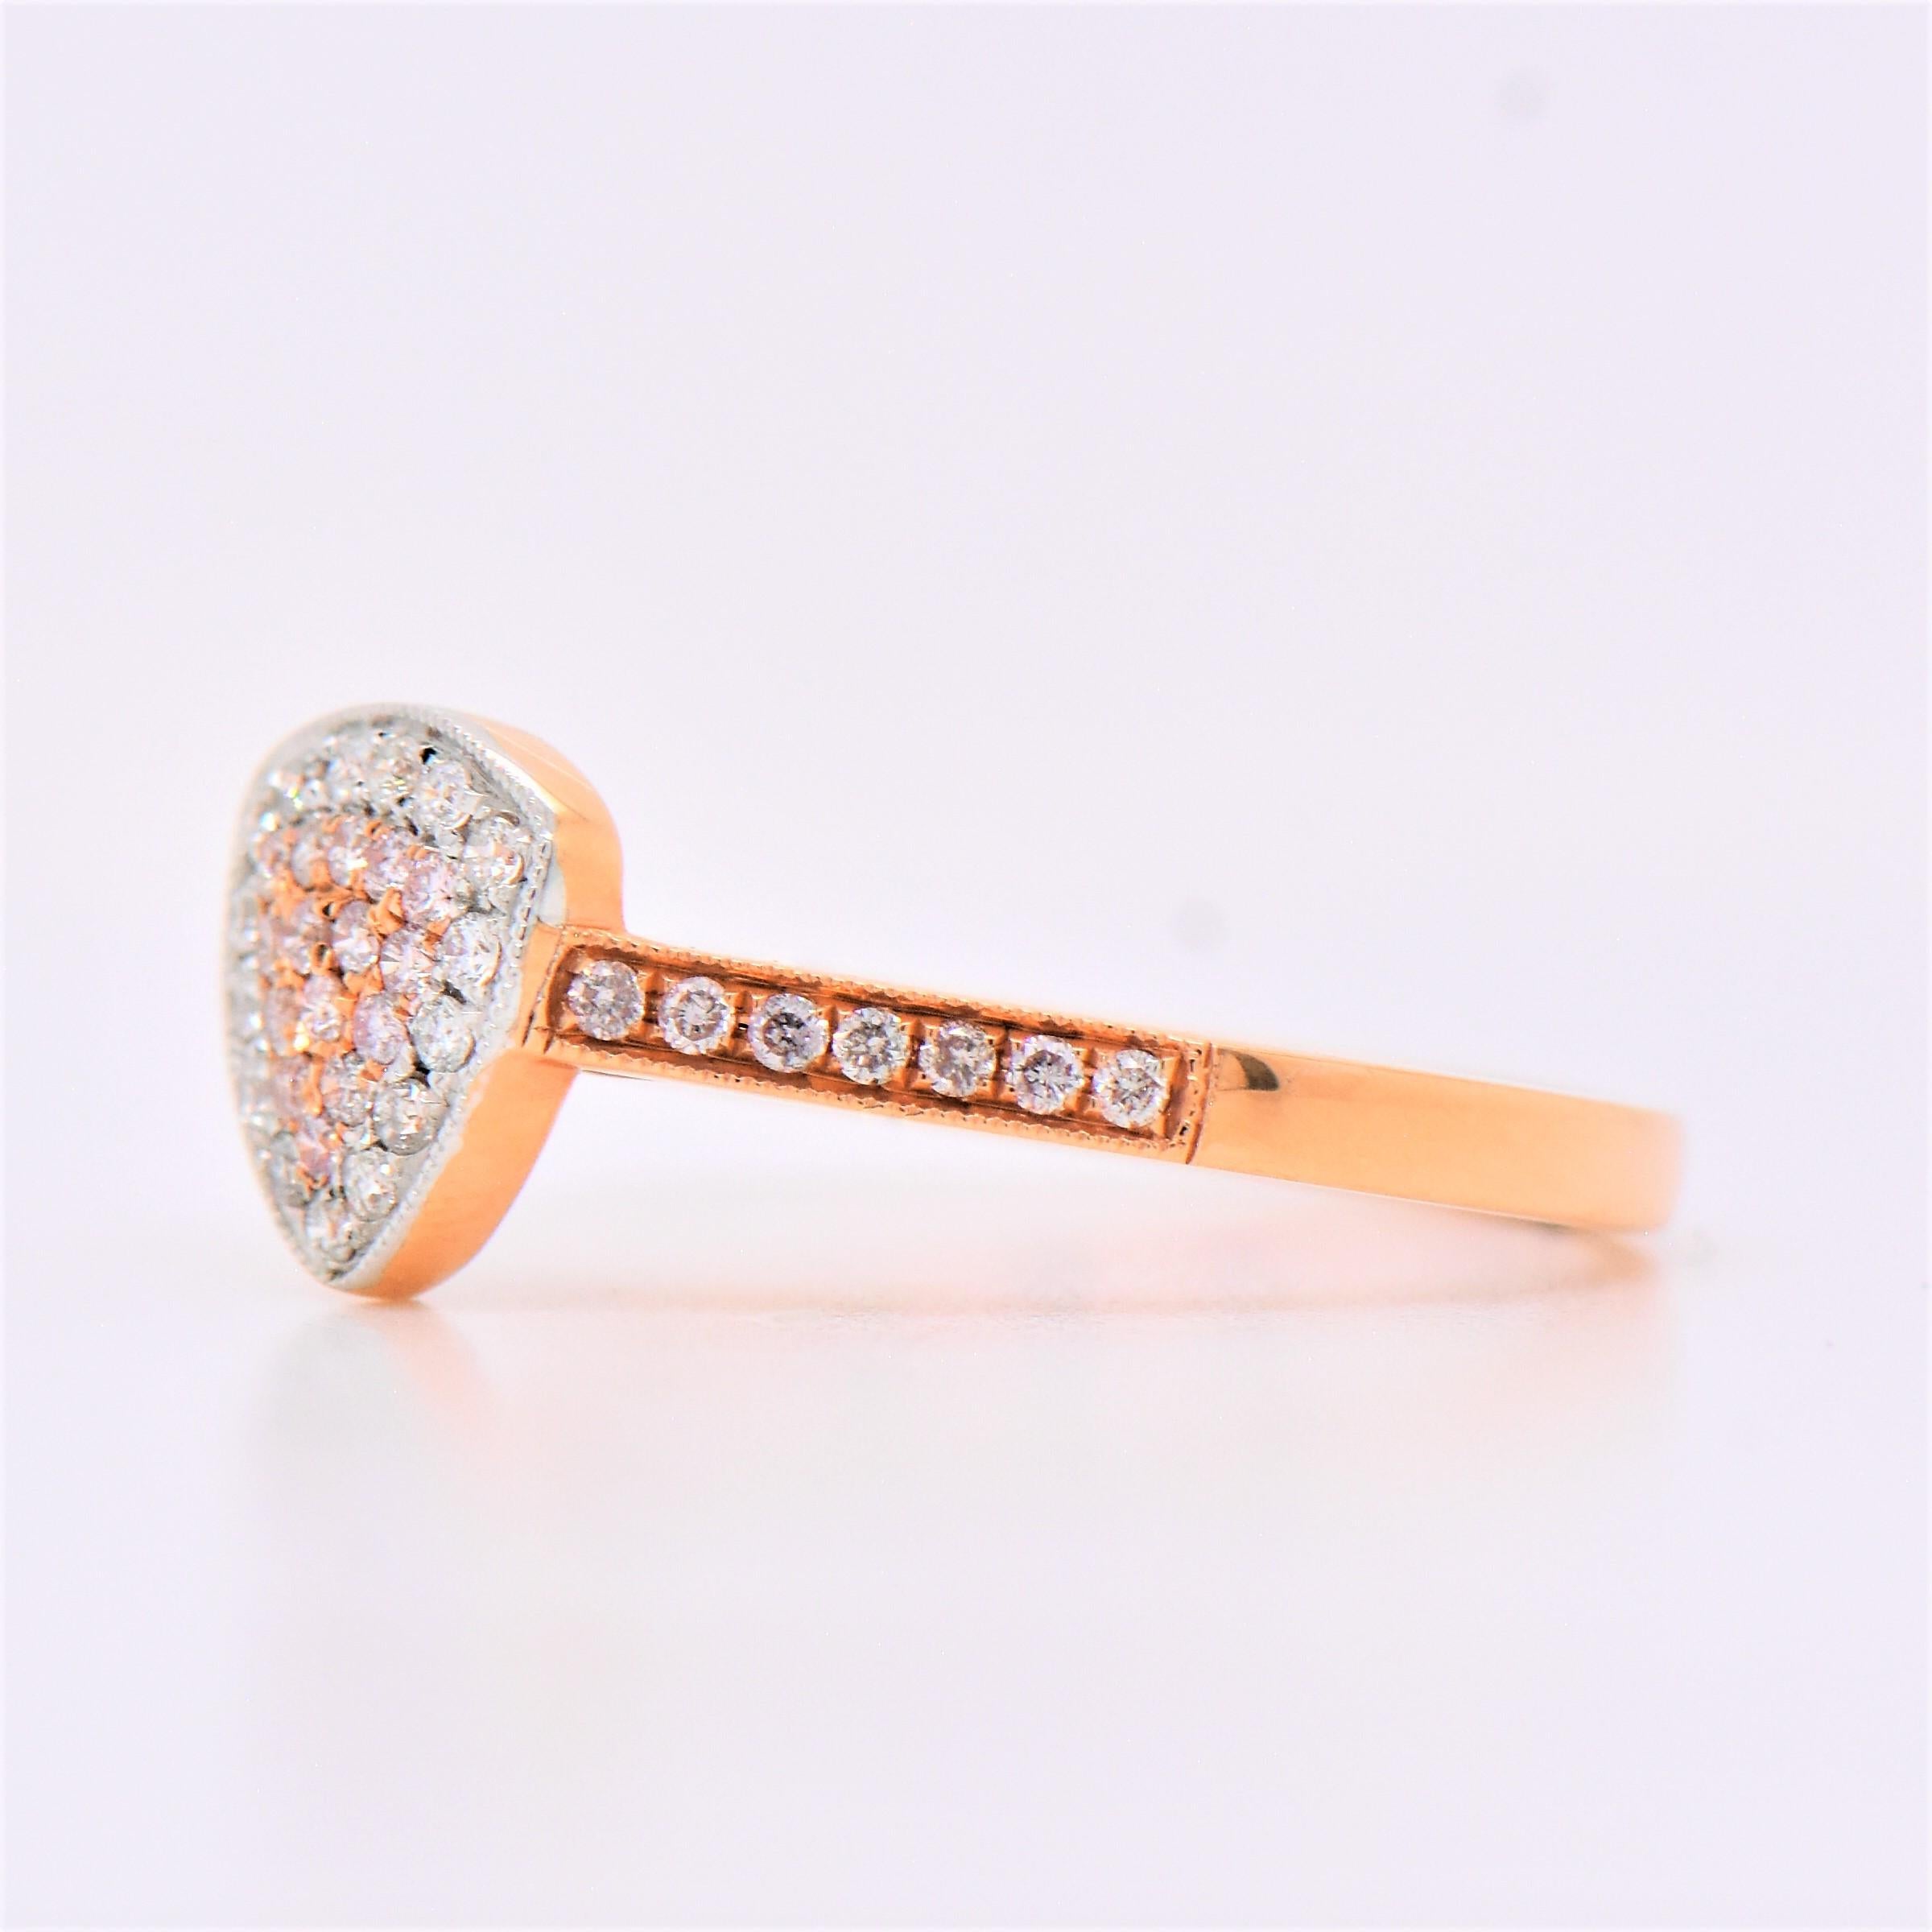 Unique Engagement Ring Natural Fancy Pink Diamonds Ring Two Tone Gold. Triangle Shaped Diamonds Wedding Halo Geometric. Bridal Promise. Anniversary Solitaire Women.
All our jewelry is 100% authentic. Feel free to contact me with any